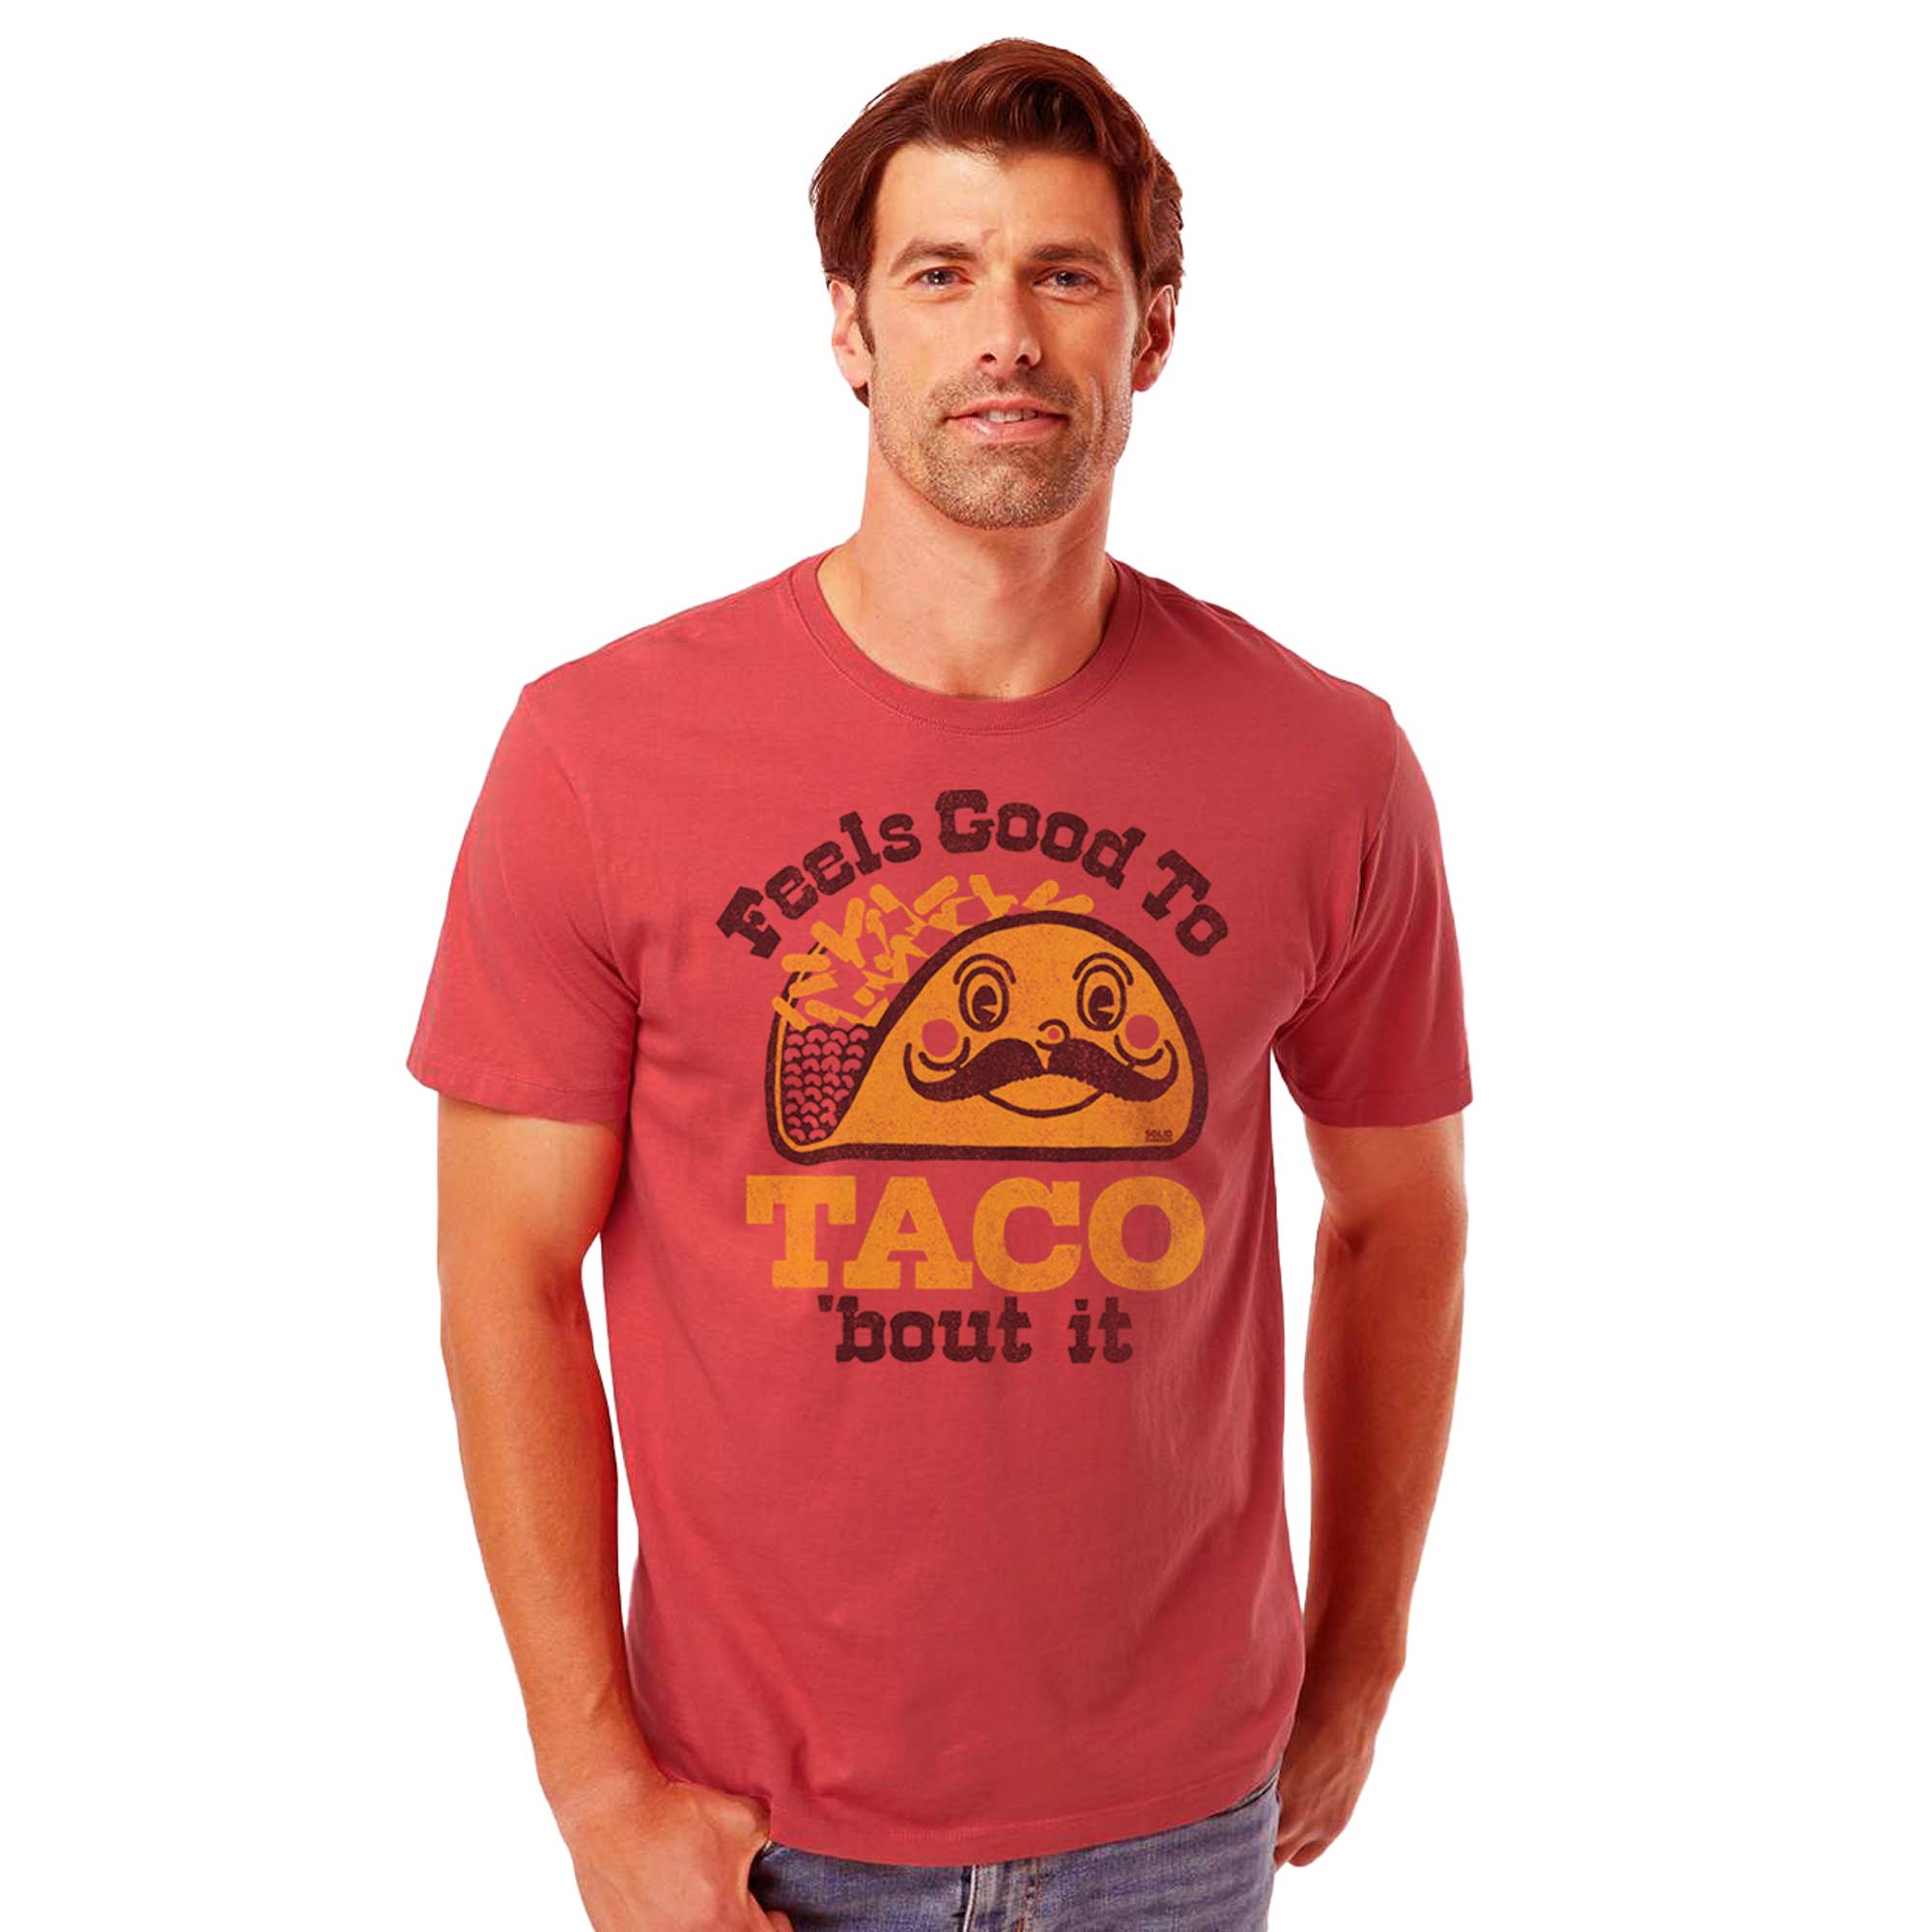 Feels Good To Taco Bout It Vintage Organic Cotton T-shirt | Funny Mexican Food  Tee | Solid Threads